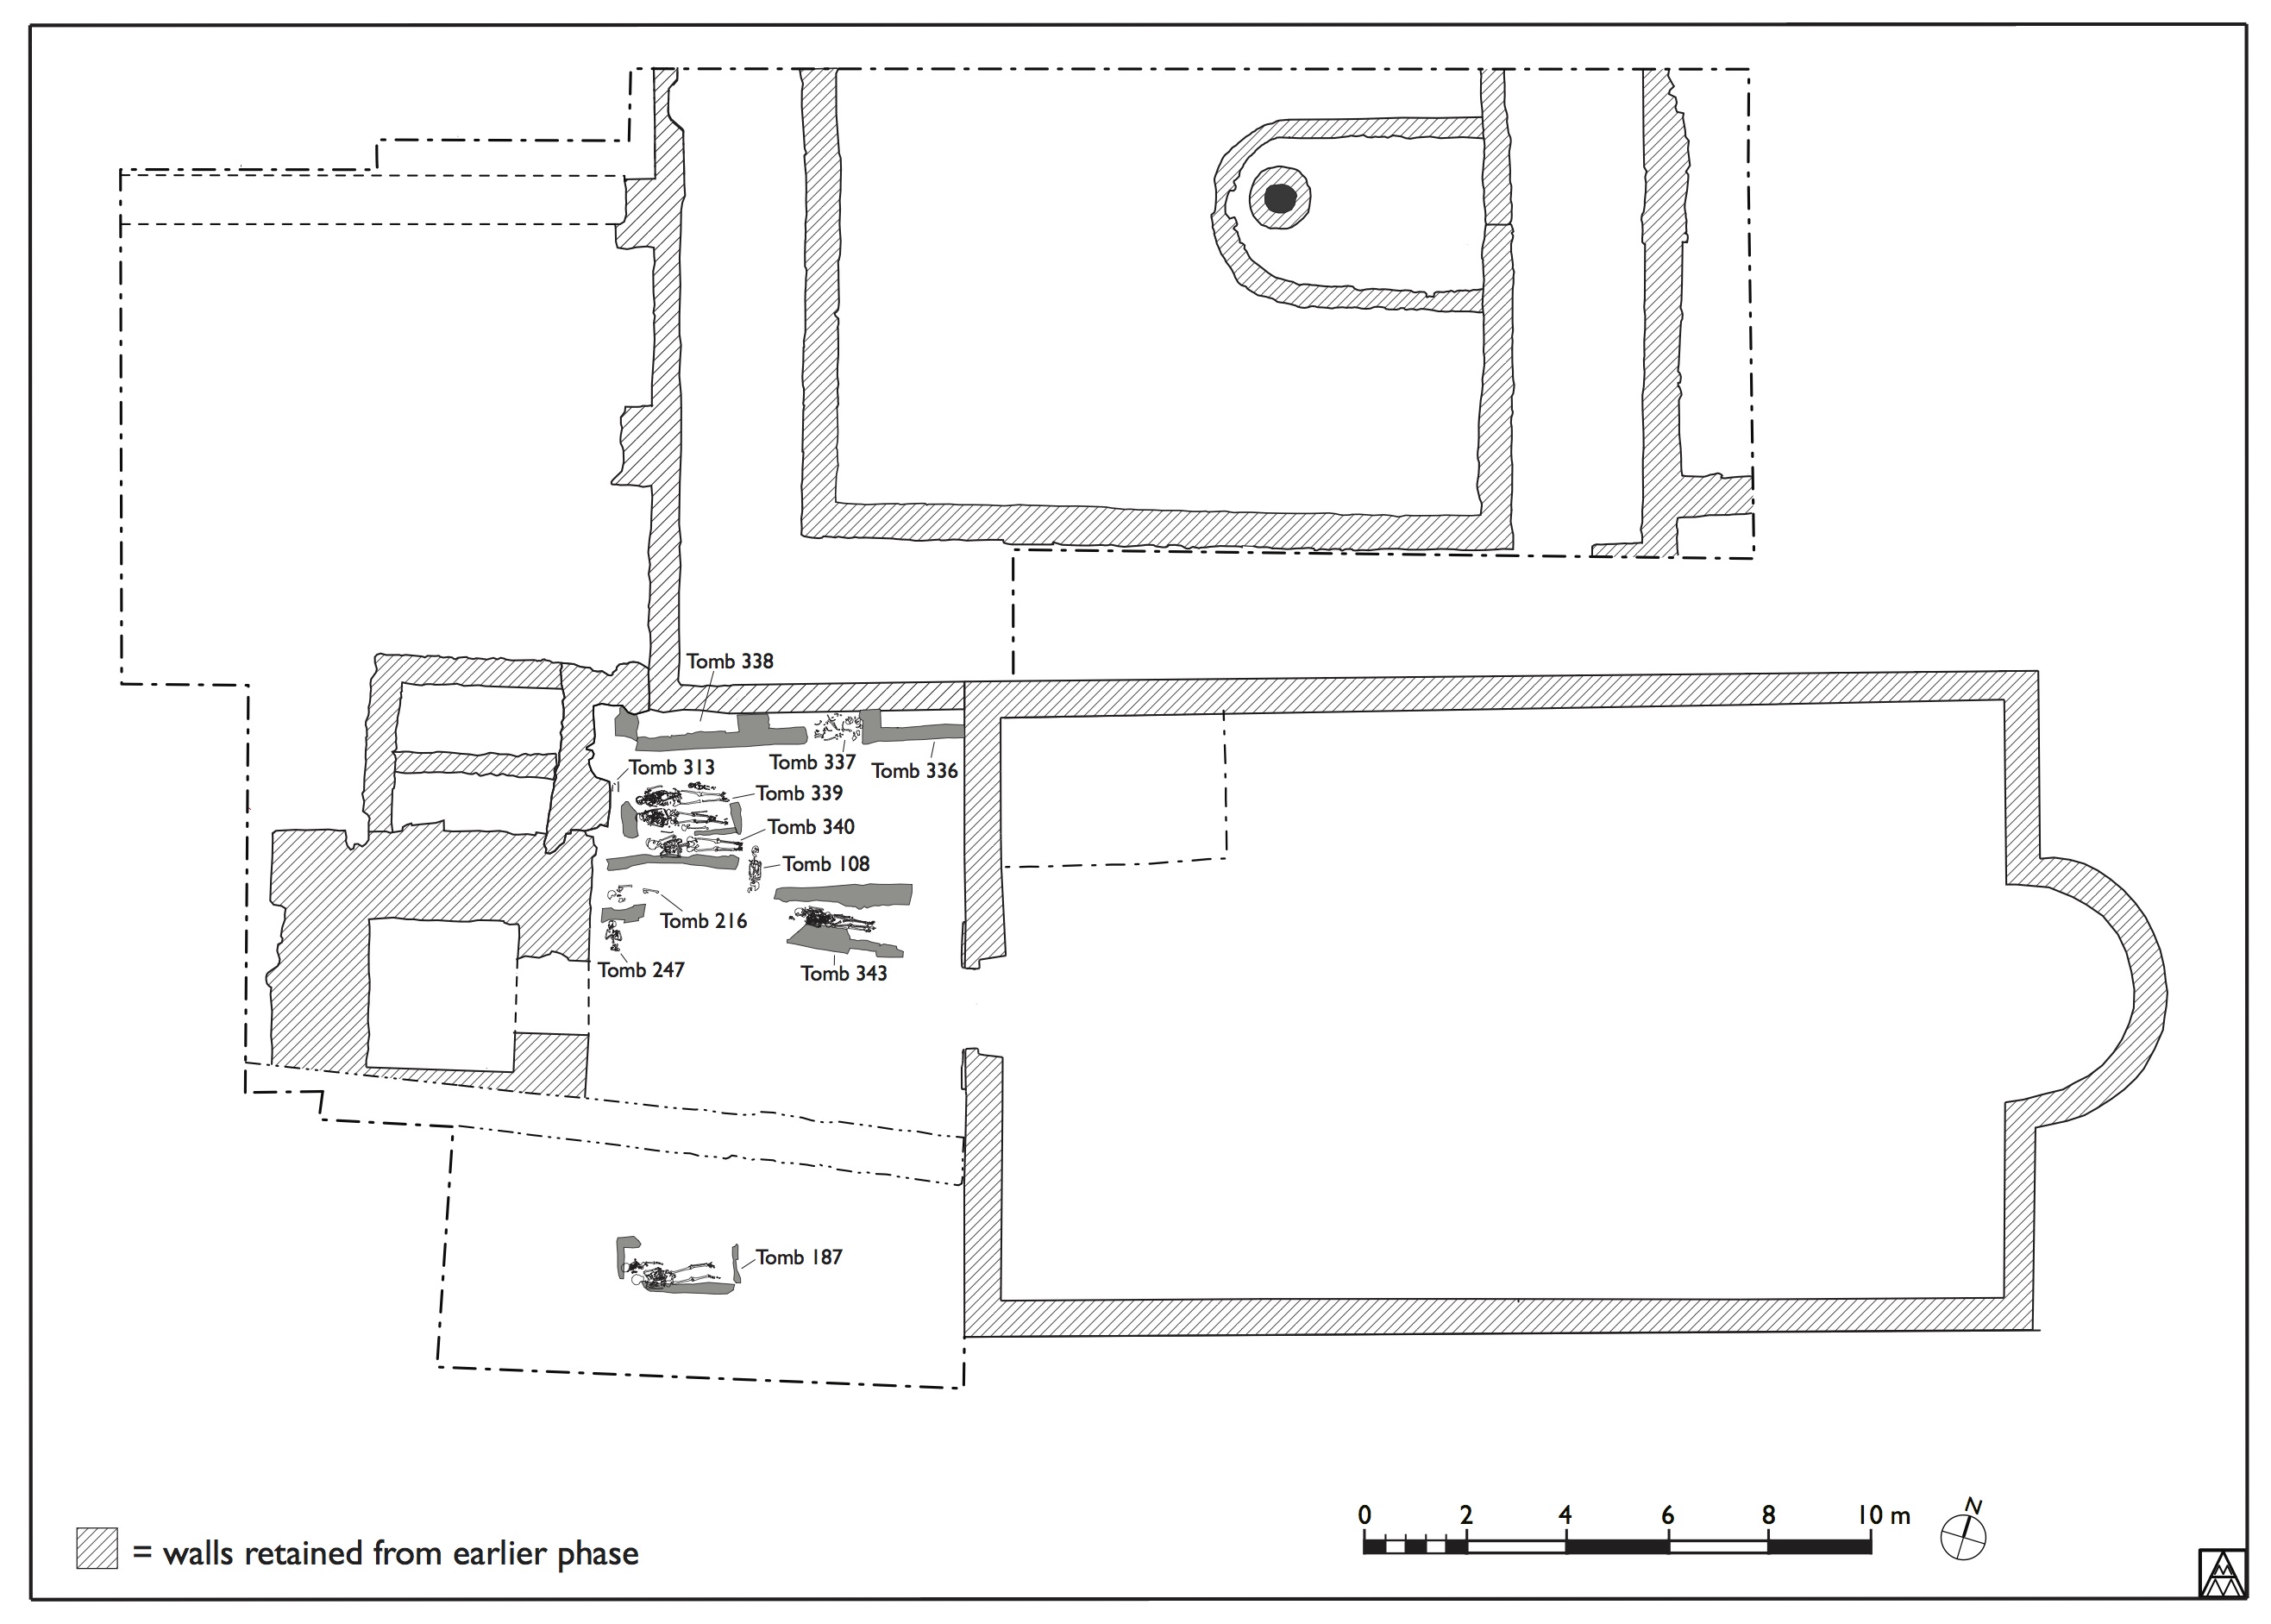 Figure 36. Phase plan showing Late Medieval A (Margaret Andrews).